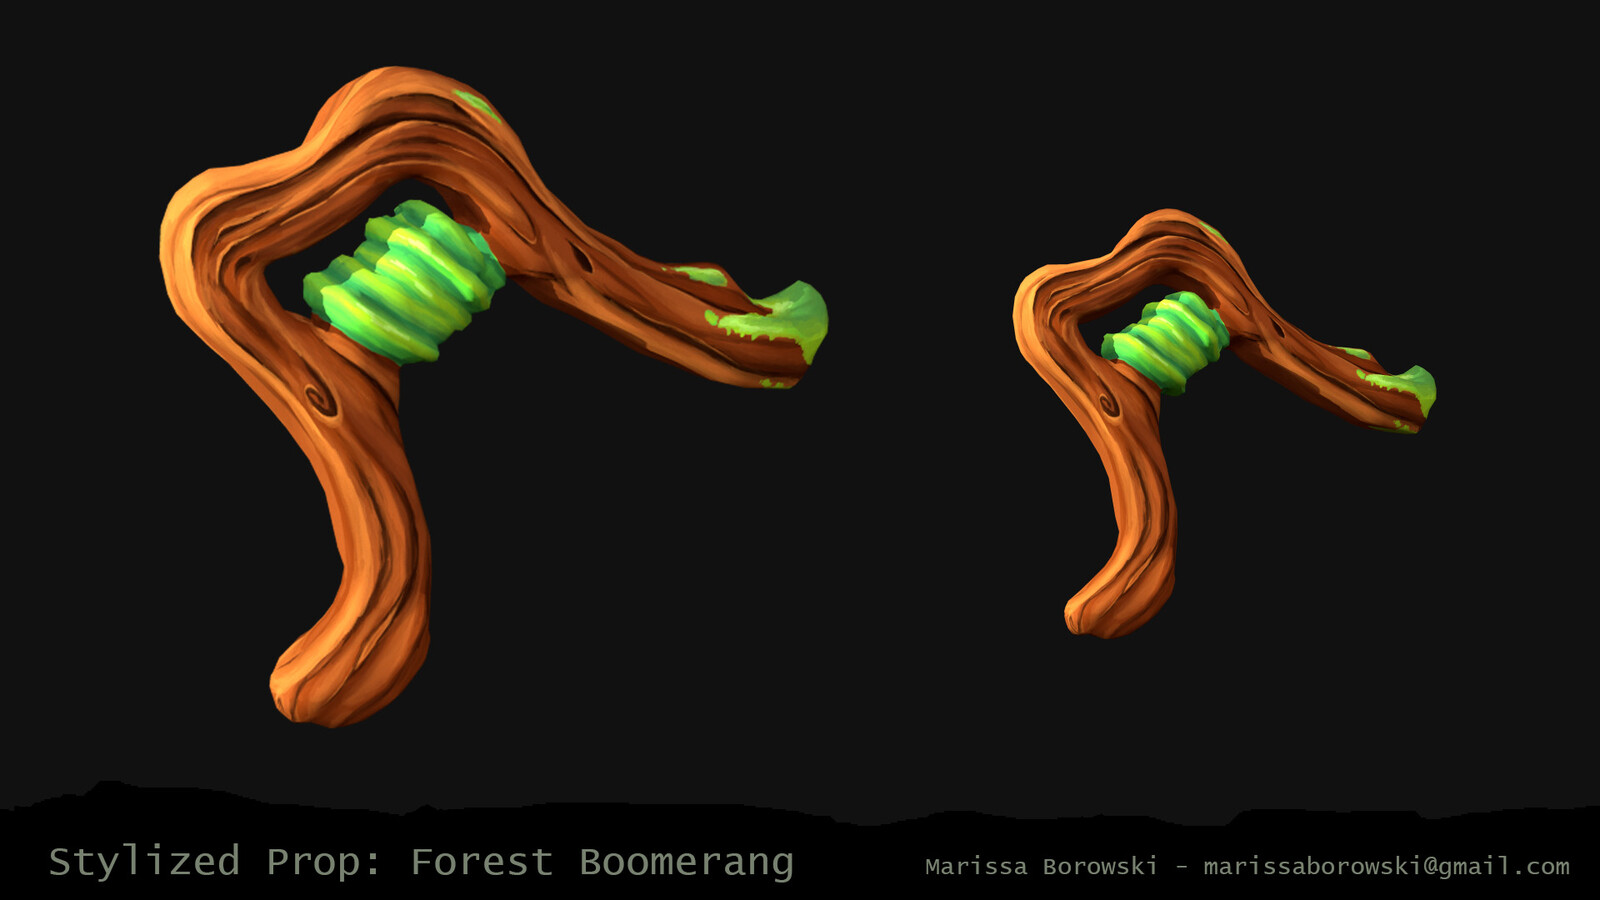 Stylized Prop: Forest Boomerang